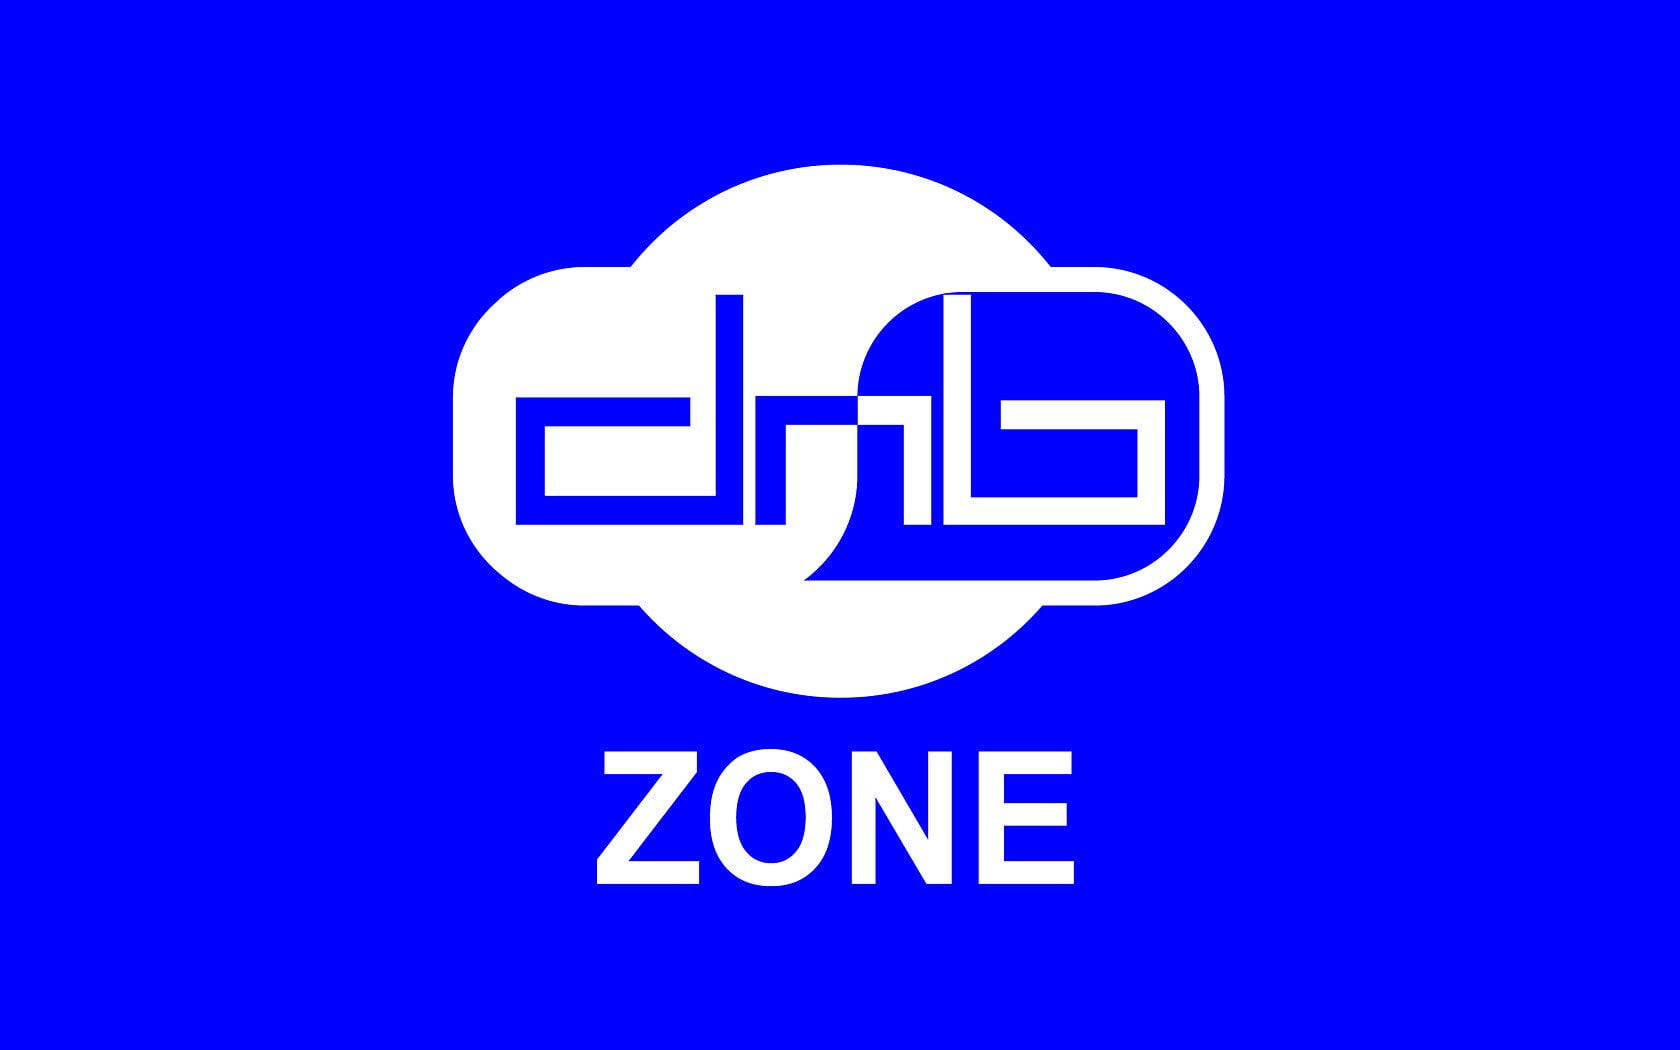 Dnb Zone Logo Drum And Bass Blue Background Text HD Wallpaper